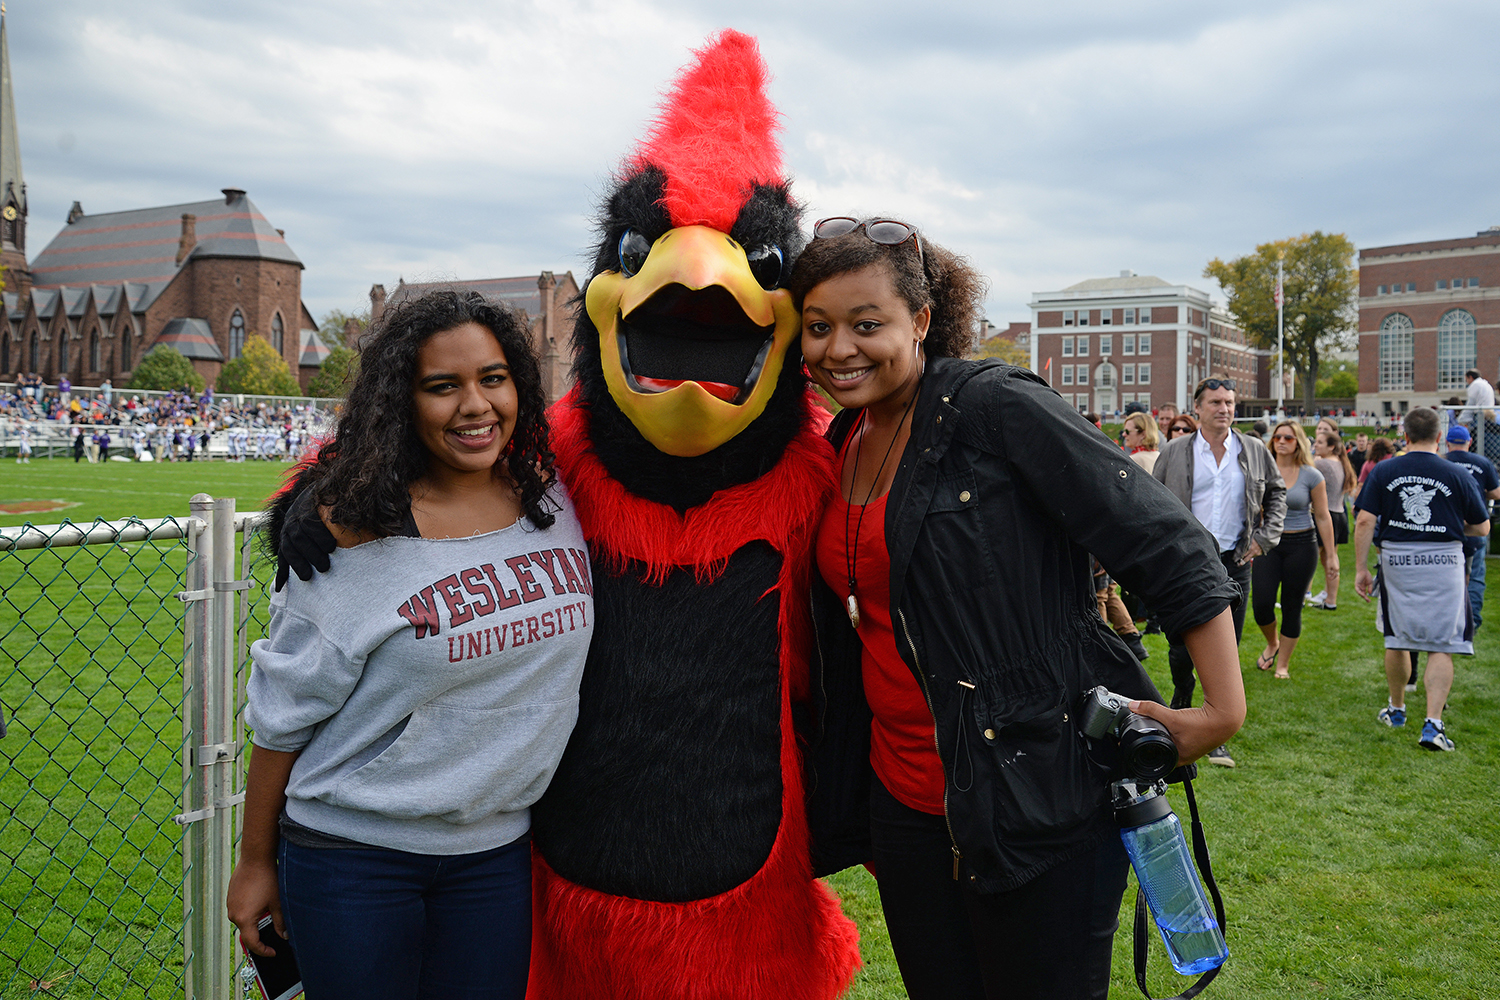 Wesleyan's Homecoming Celebration included six athletic contests.